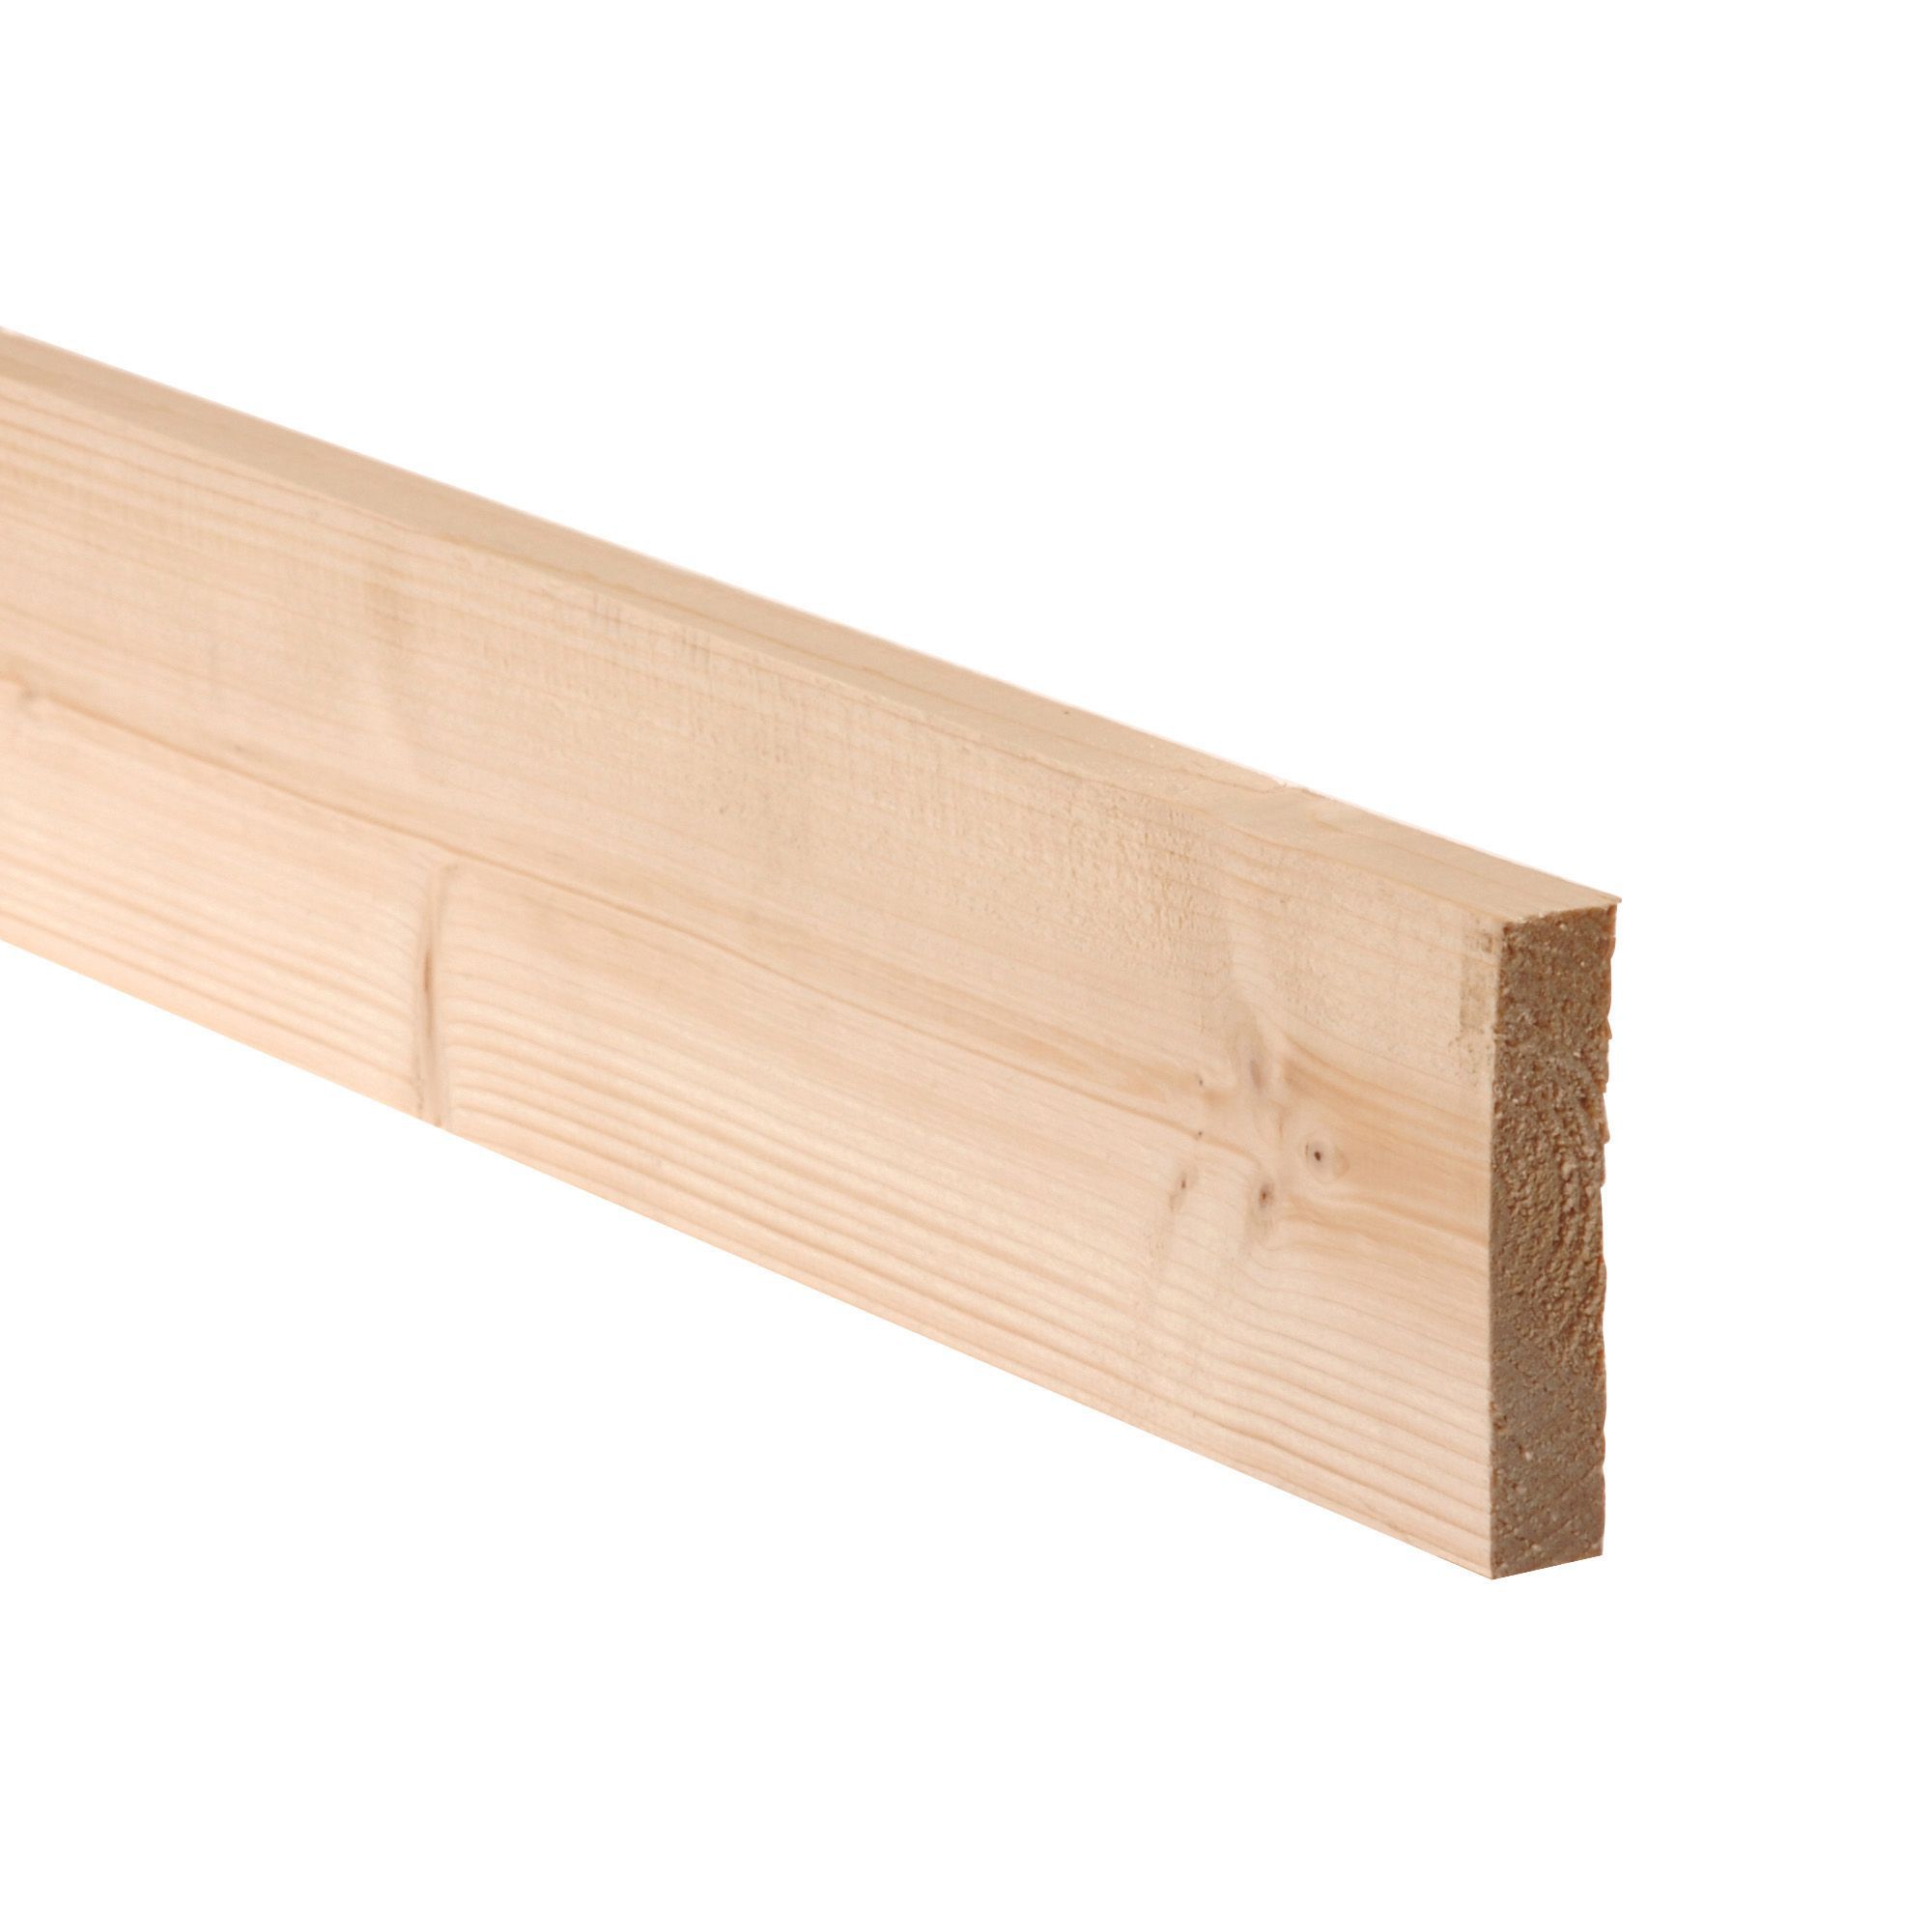 Smooth Planed Square edge Stick timber (L)2.4m (W)94mm (T)18mm, Pack of 8